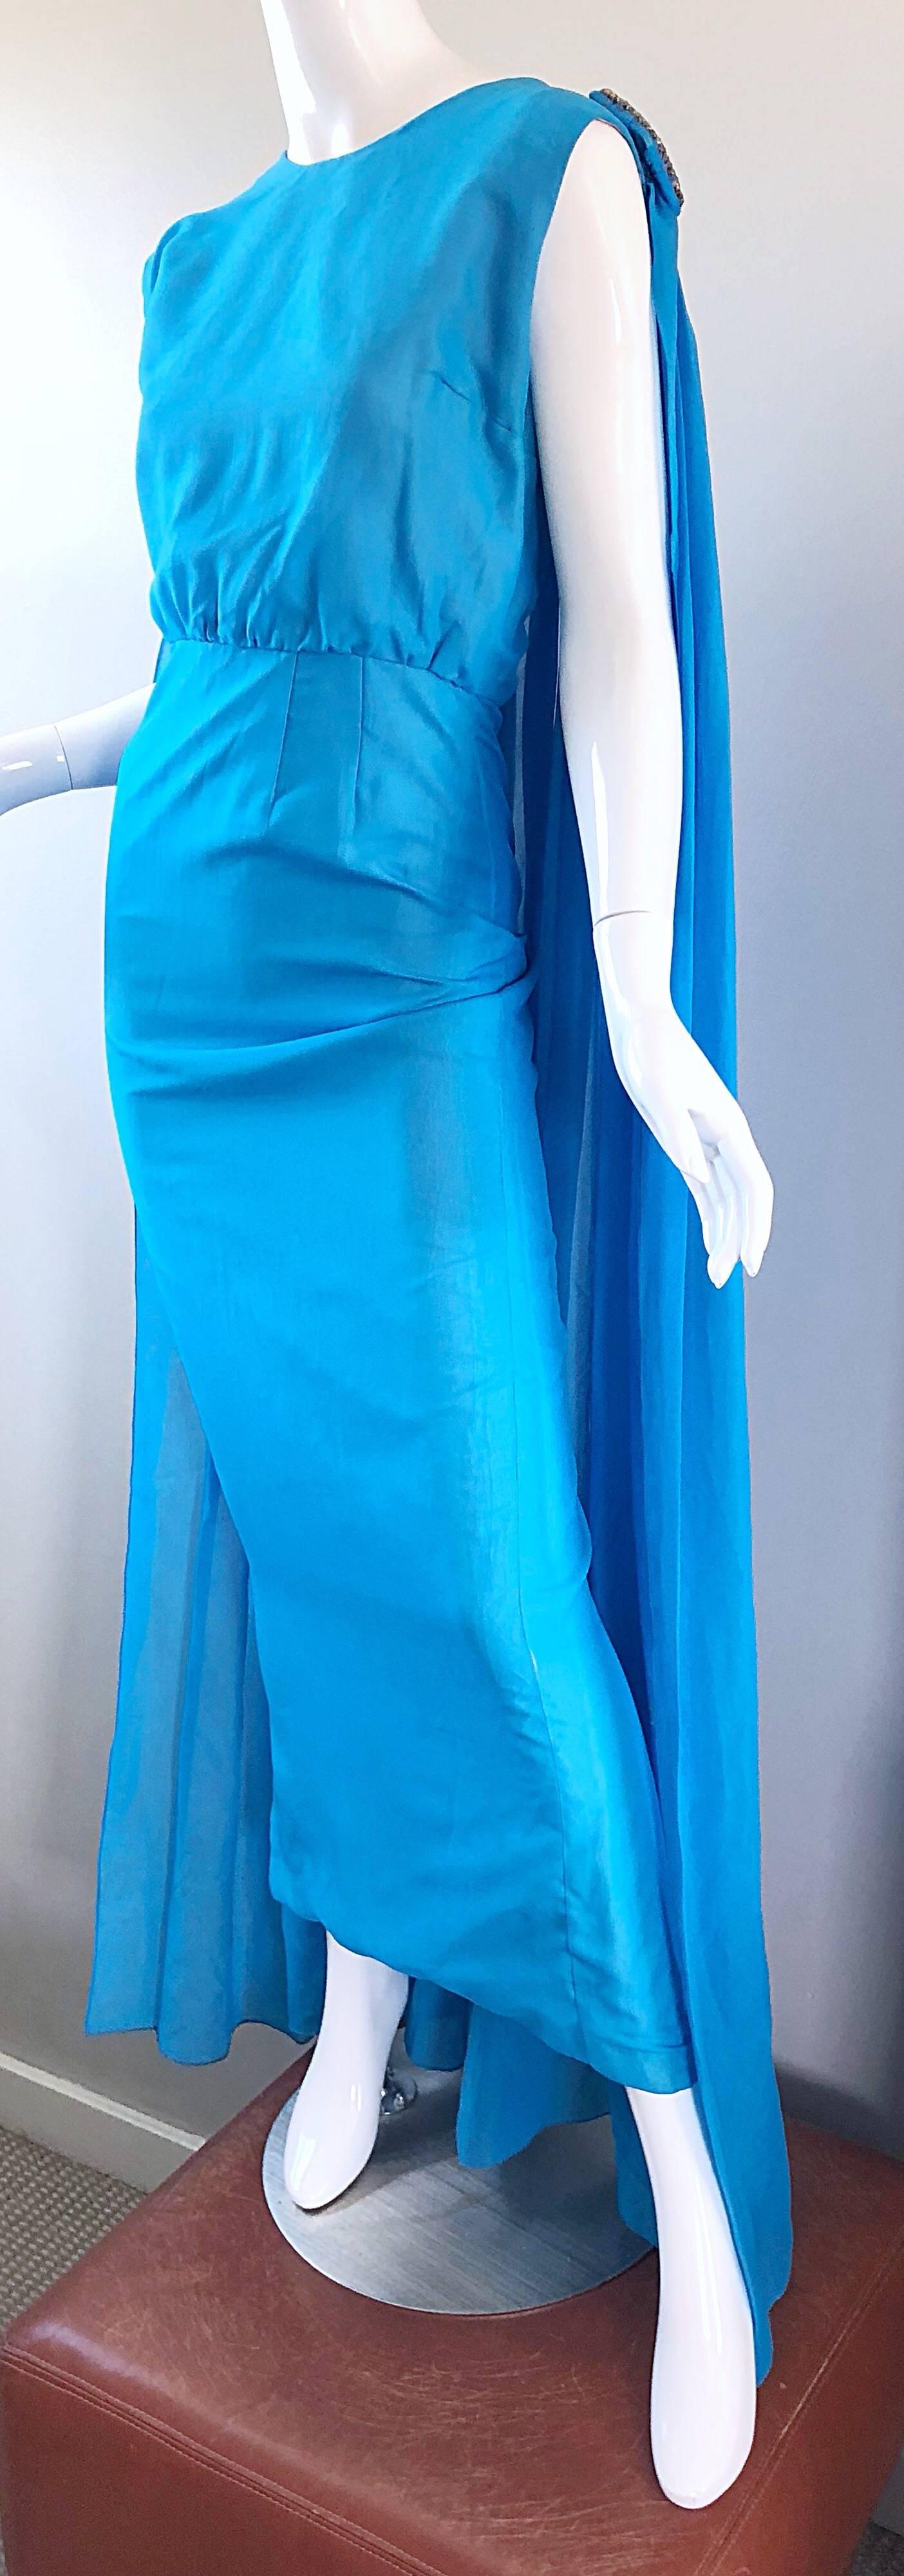 Incredible 1960s Turquoise Blue Chiffon Rhinestone Encrusted Vintage Cape Gown 3